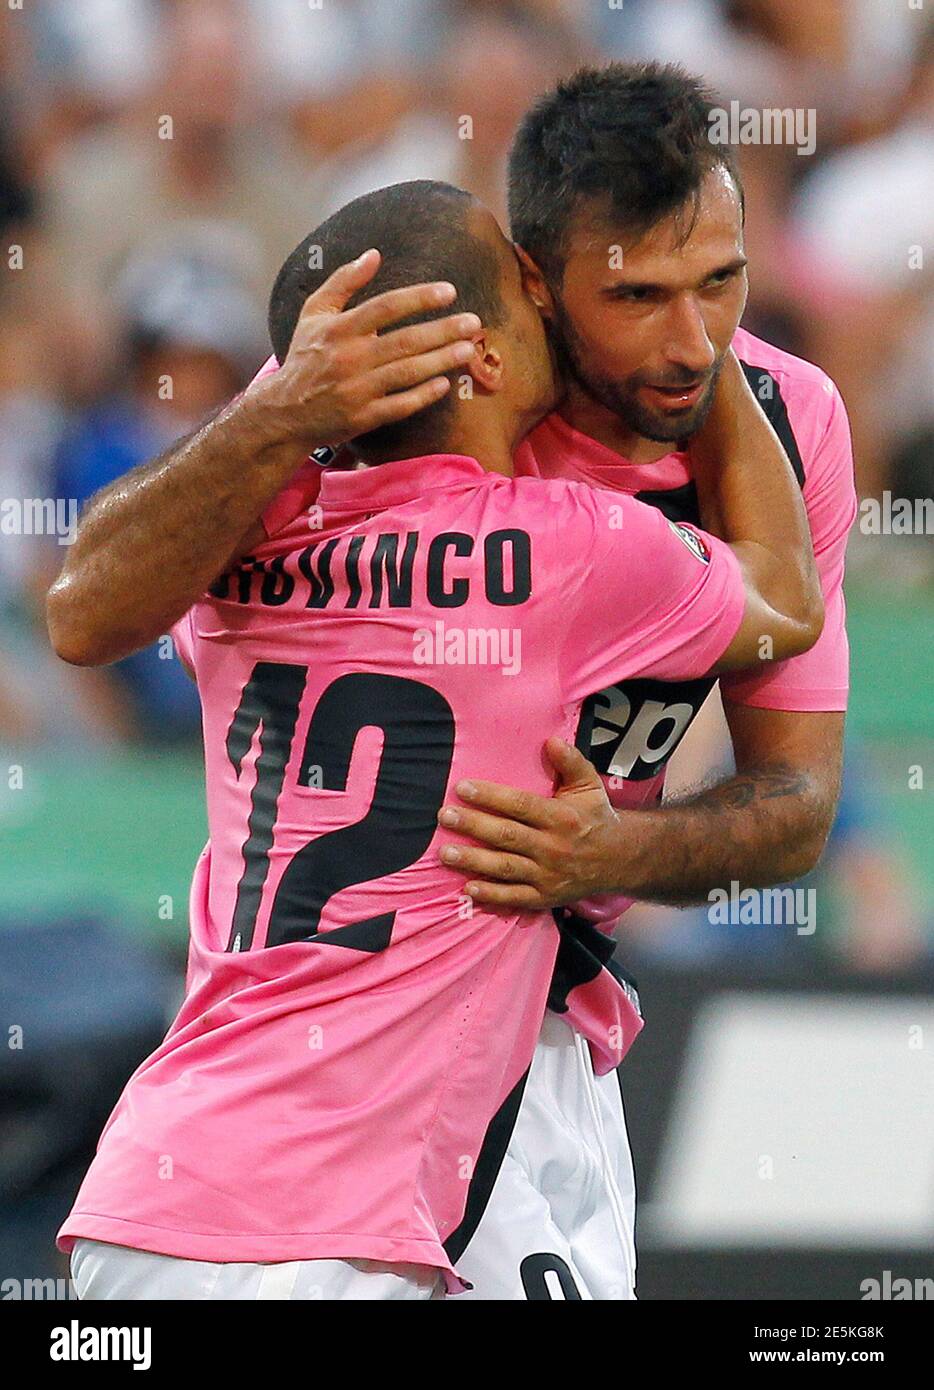 Juventus' Sebastian Giovinco (L) celebrates with his team mate Mirko  Vucinic after scoring a third goal against Udinese during their Italian  Serie A soccer match at the Friuli stadium in Udine September